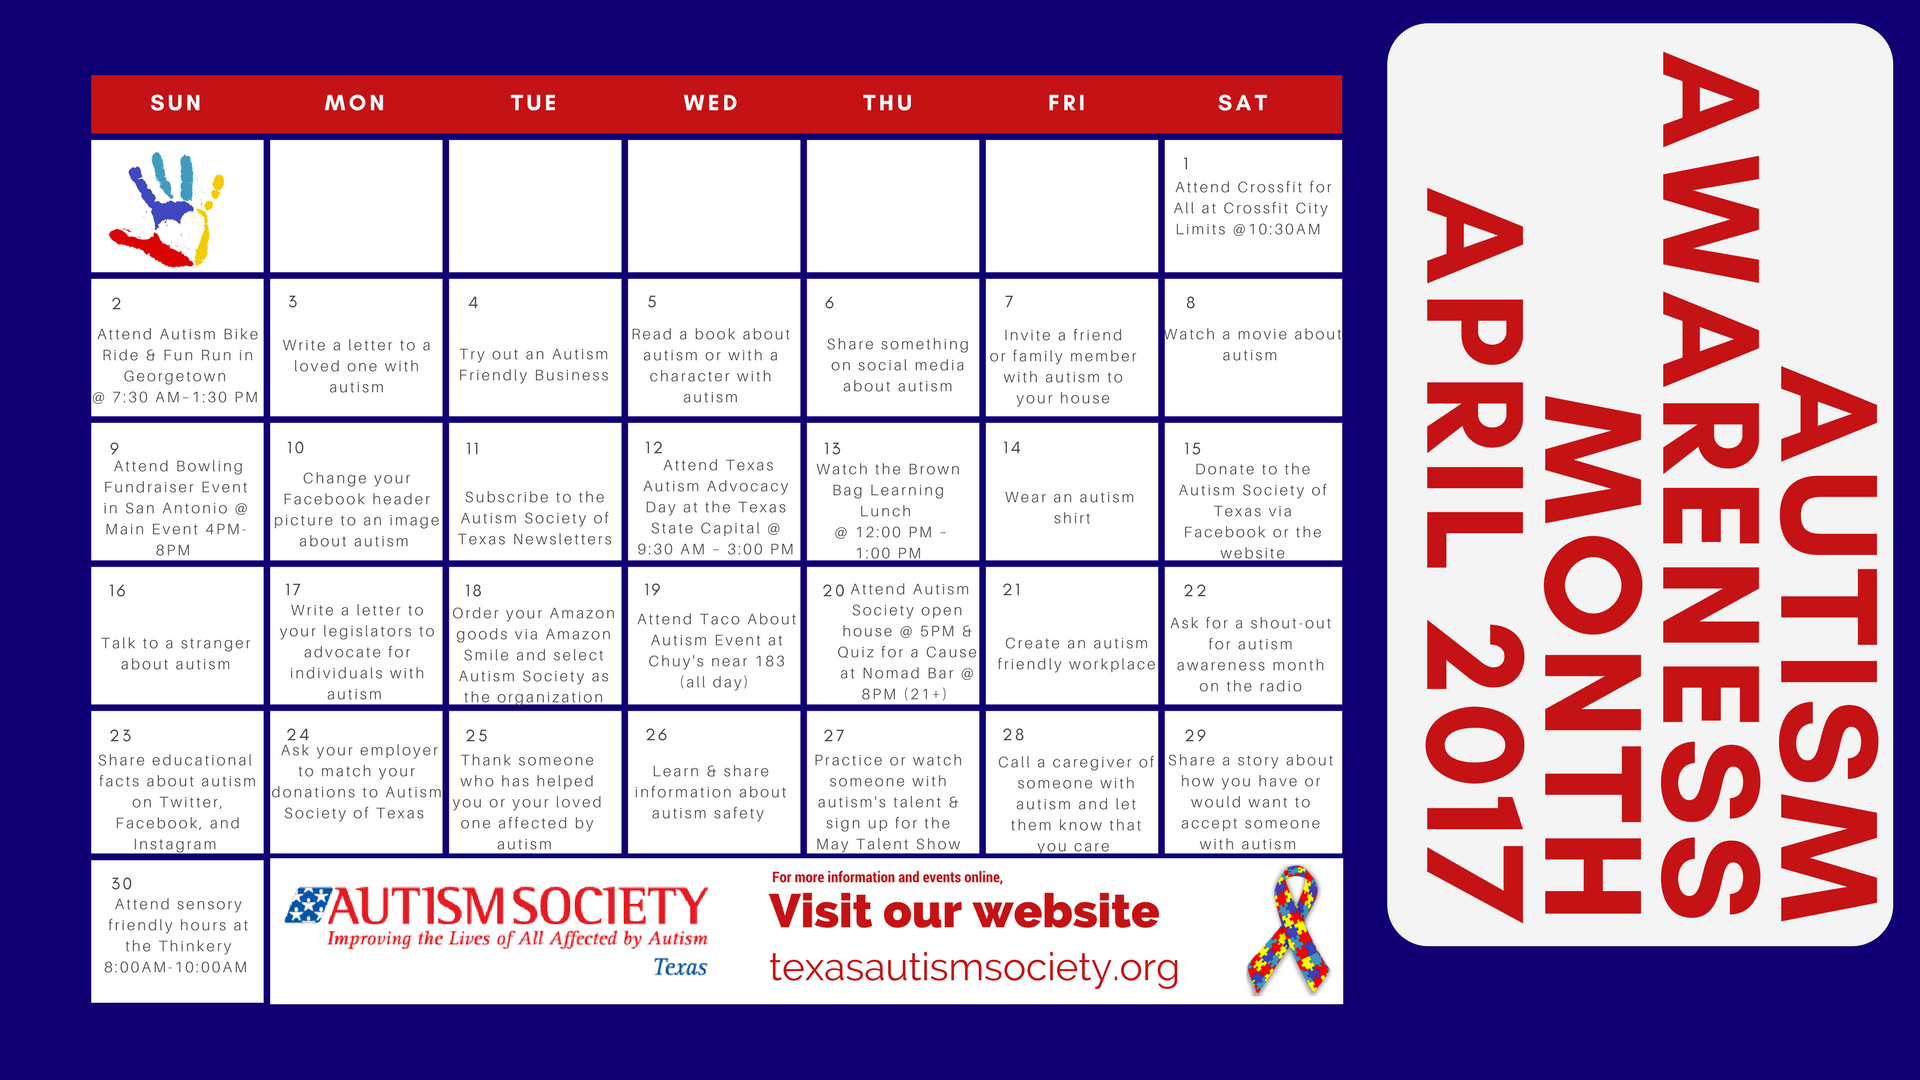 April Is Autism Awareness Month! Autism Society of Texas